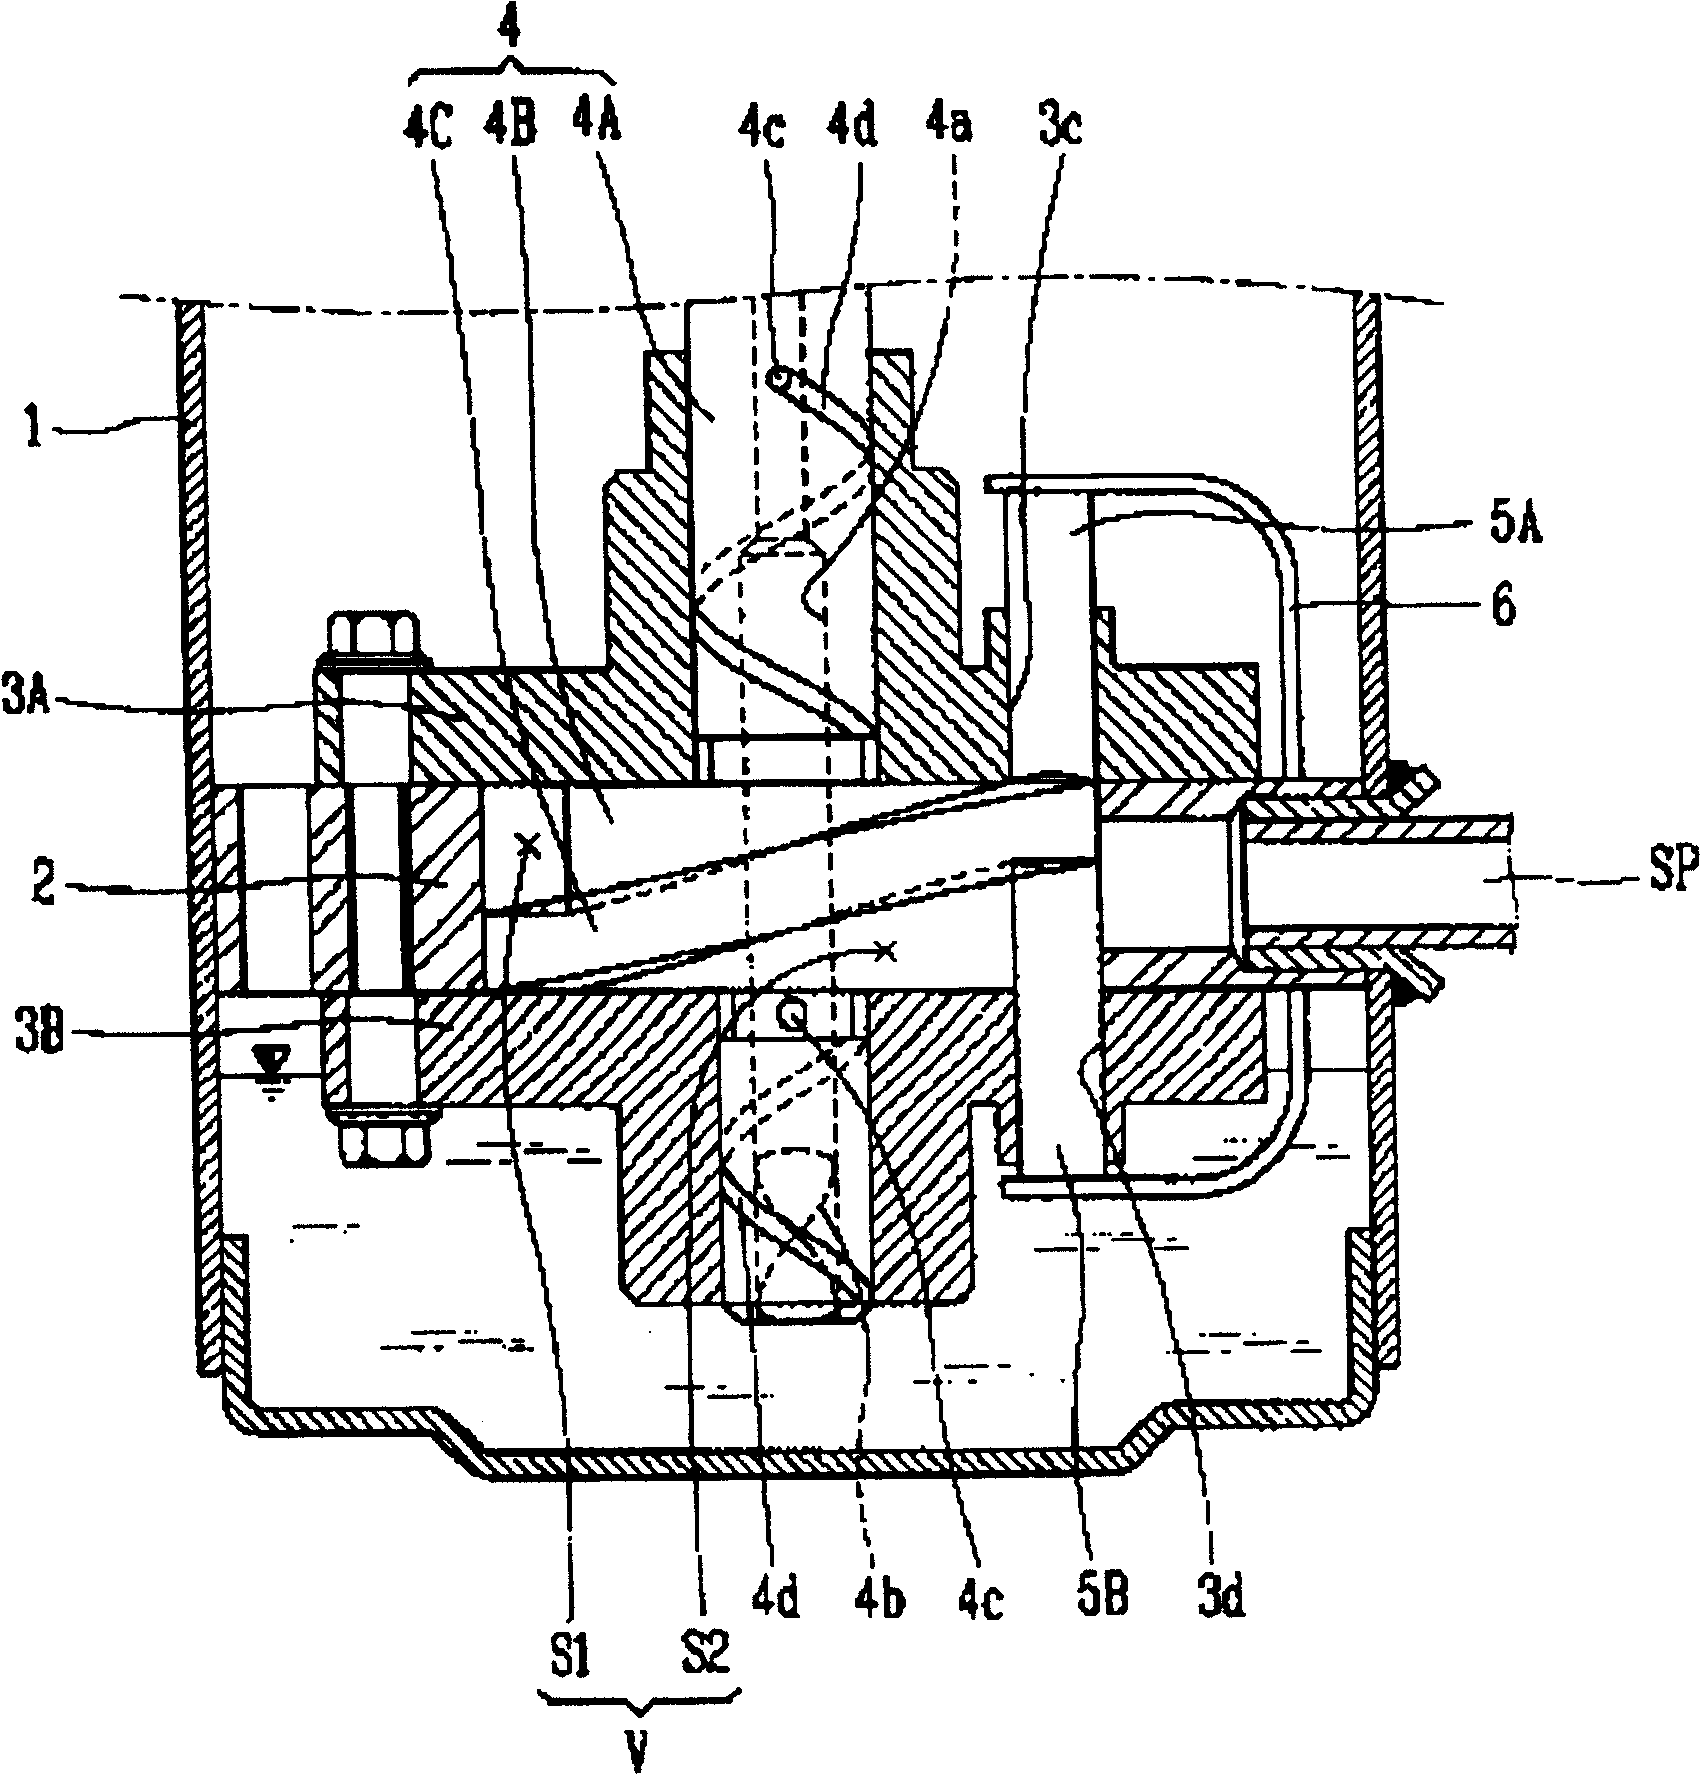 Lubricating structure for closed compressor baffle plate